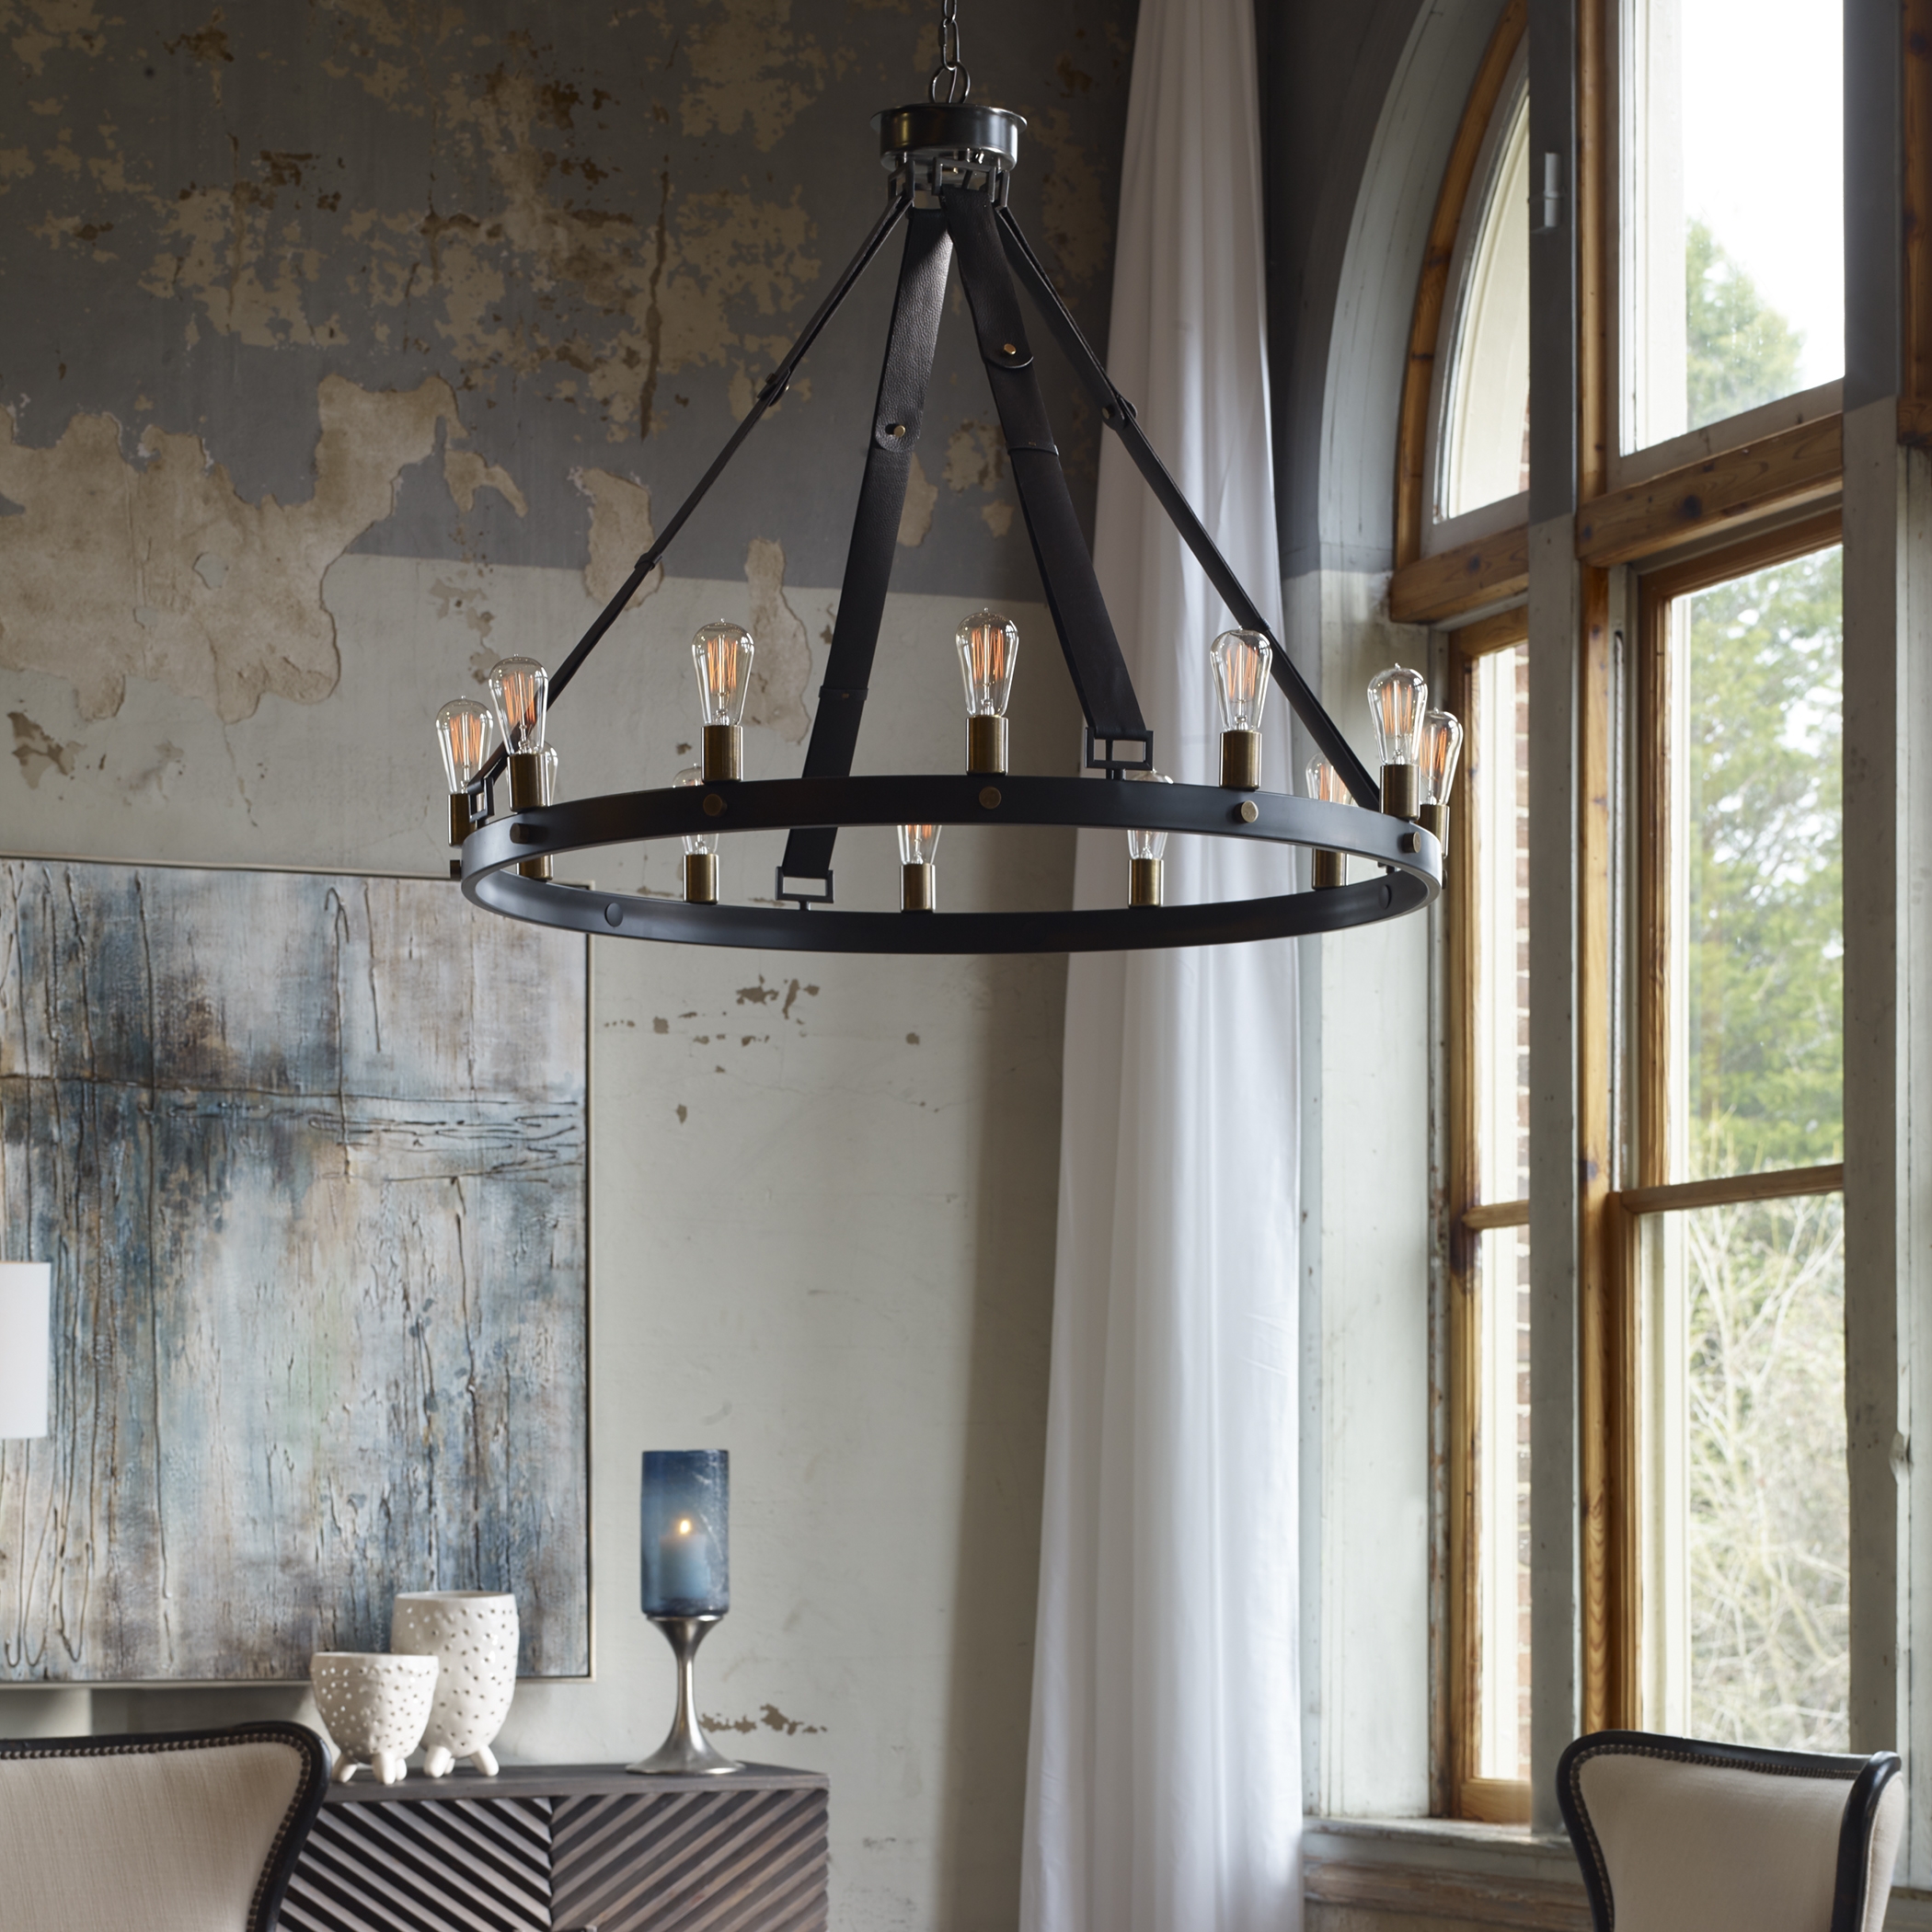 Marlow 12 Light Circle Chandelier - Image 1